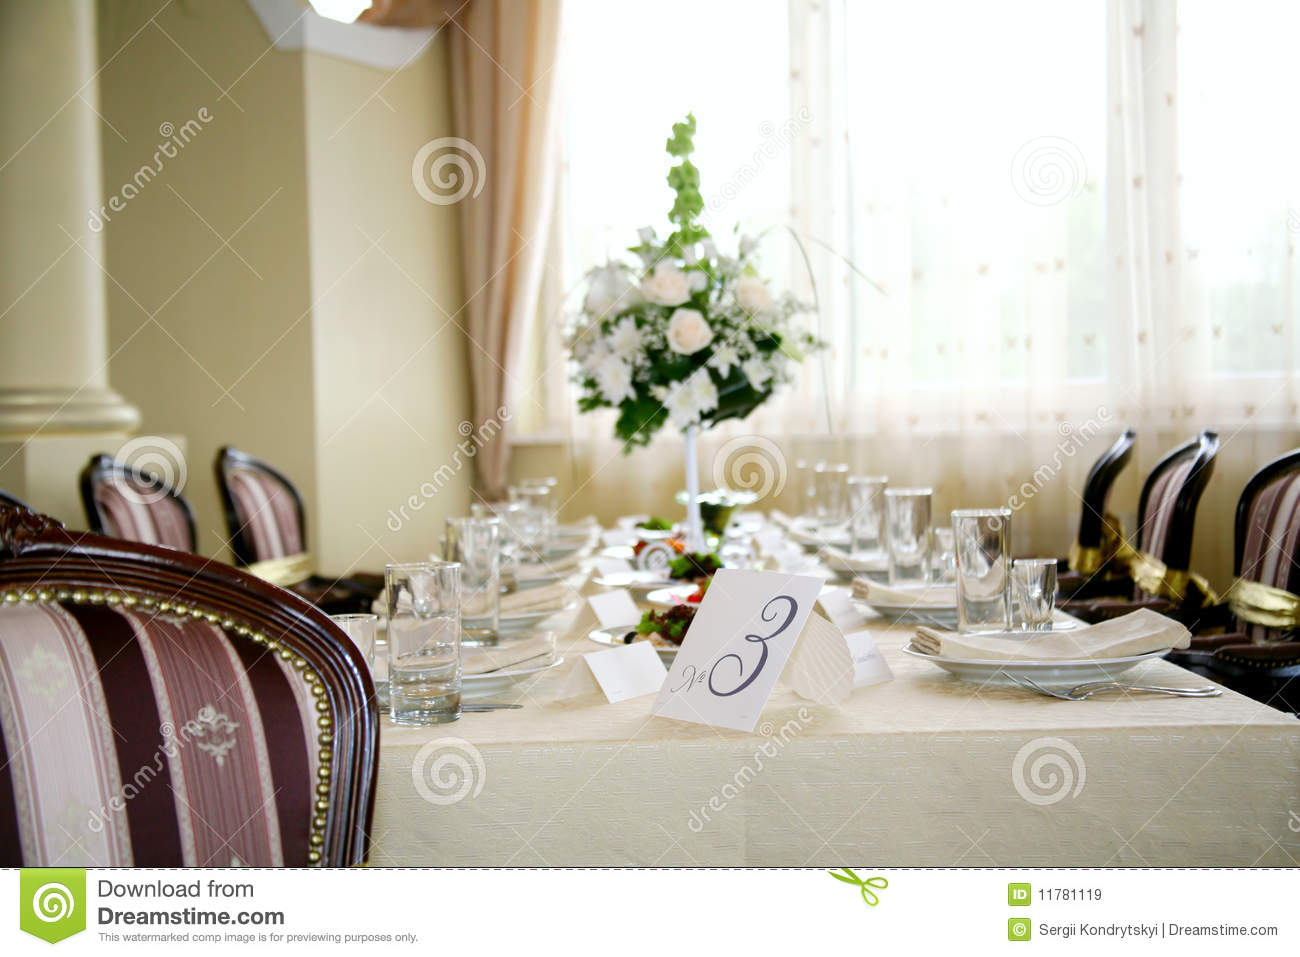 Elegant Tables And Chairs Set Up For A Wedding Banquet